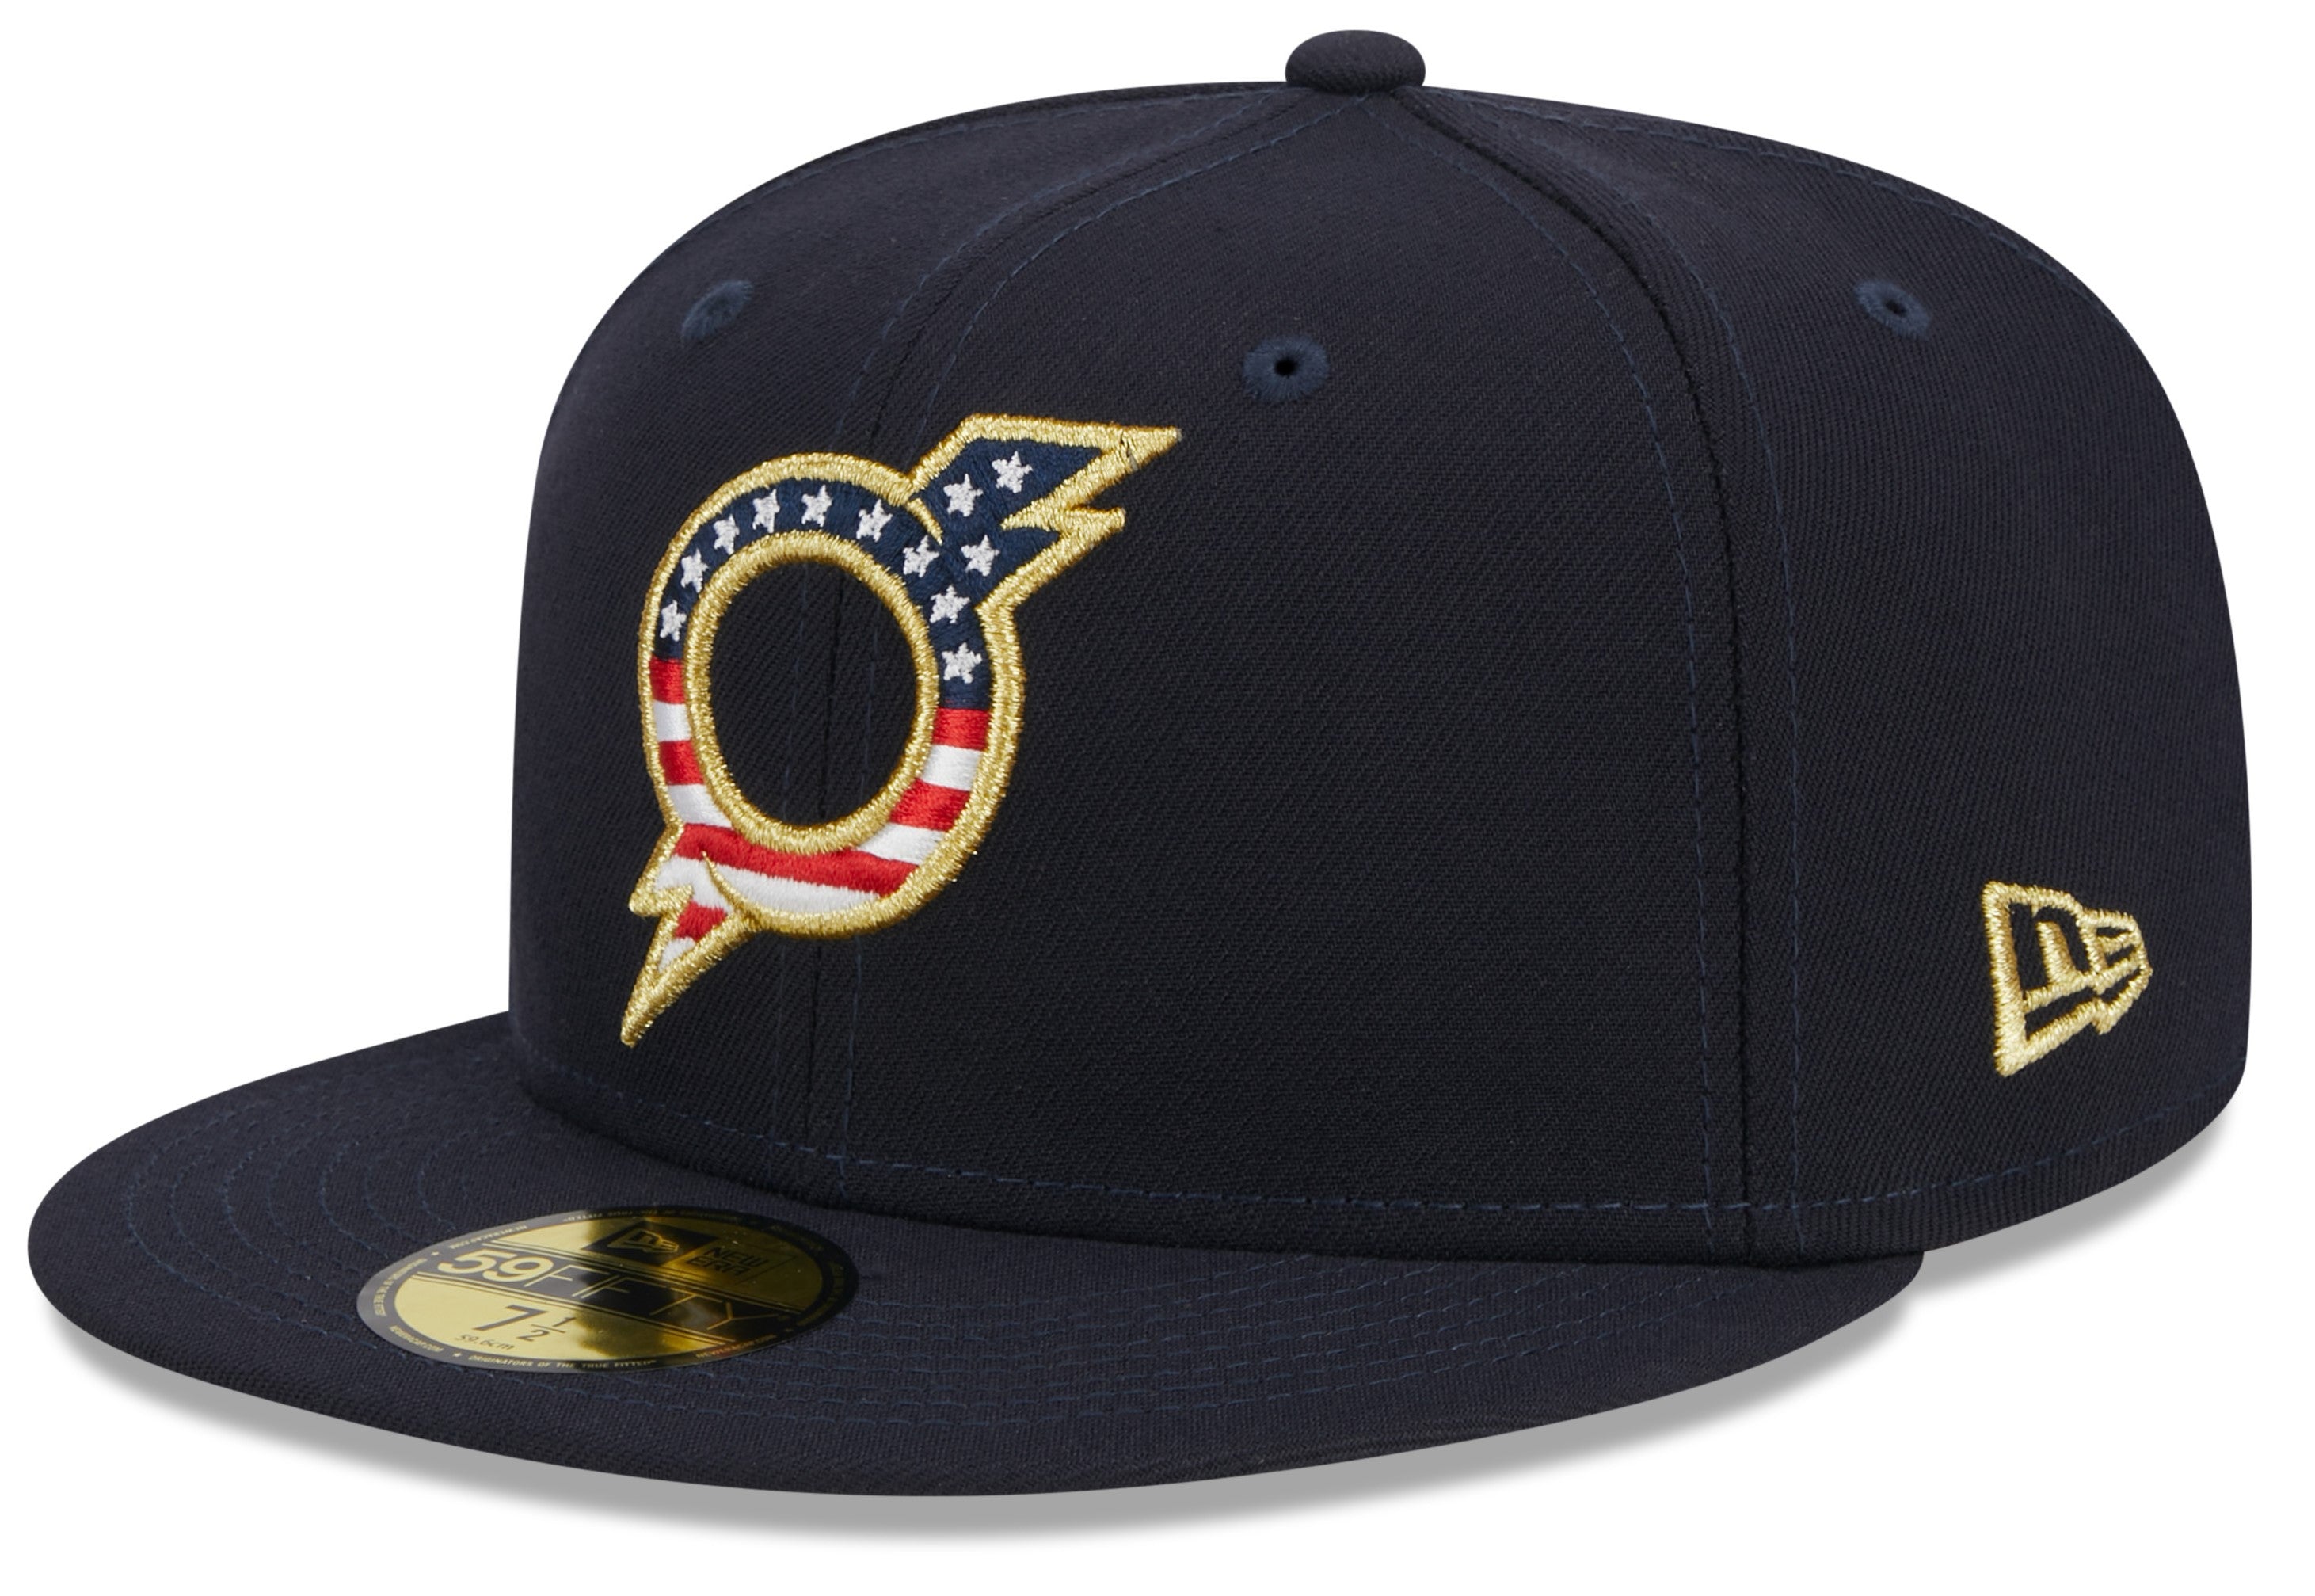 Toronto Blue Jays redesign Fourth of July hats, remove stars